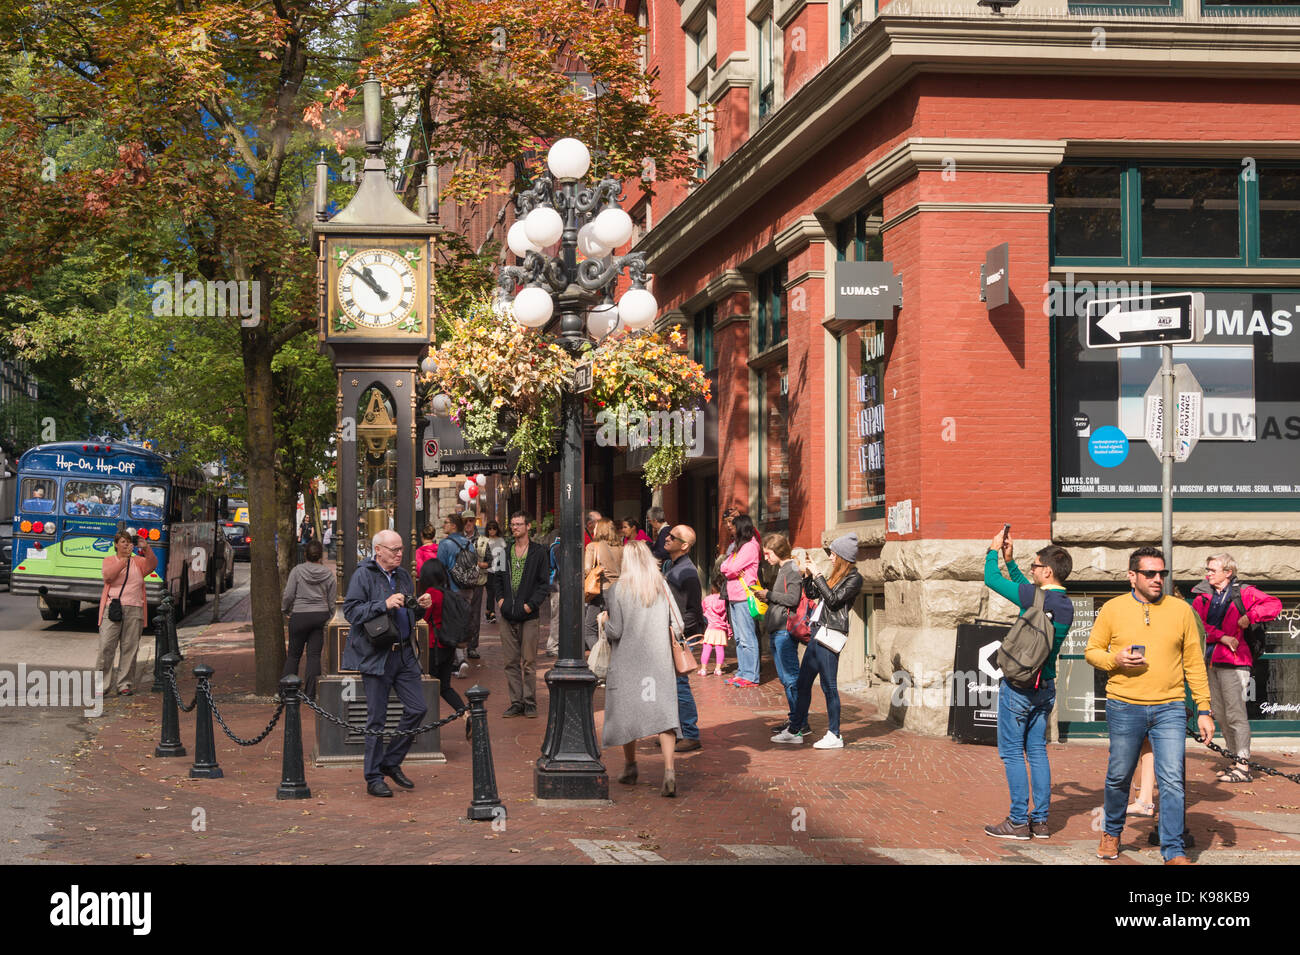 Vancouver, British Columbia, Canada - 13 September 2017: Steam Clock in Gastown District Stock Photo